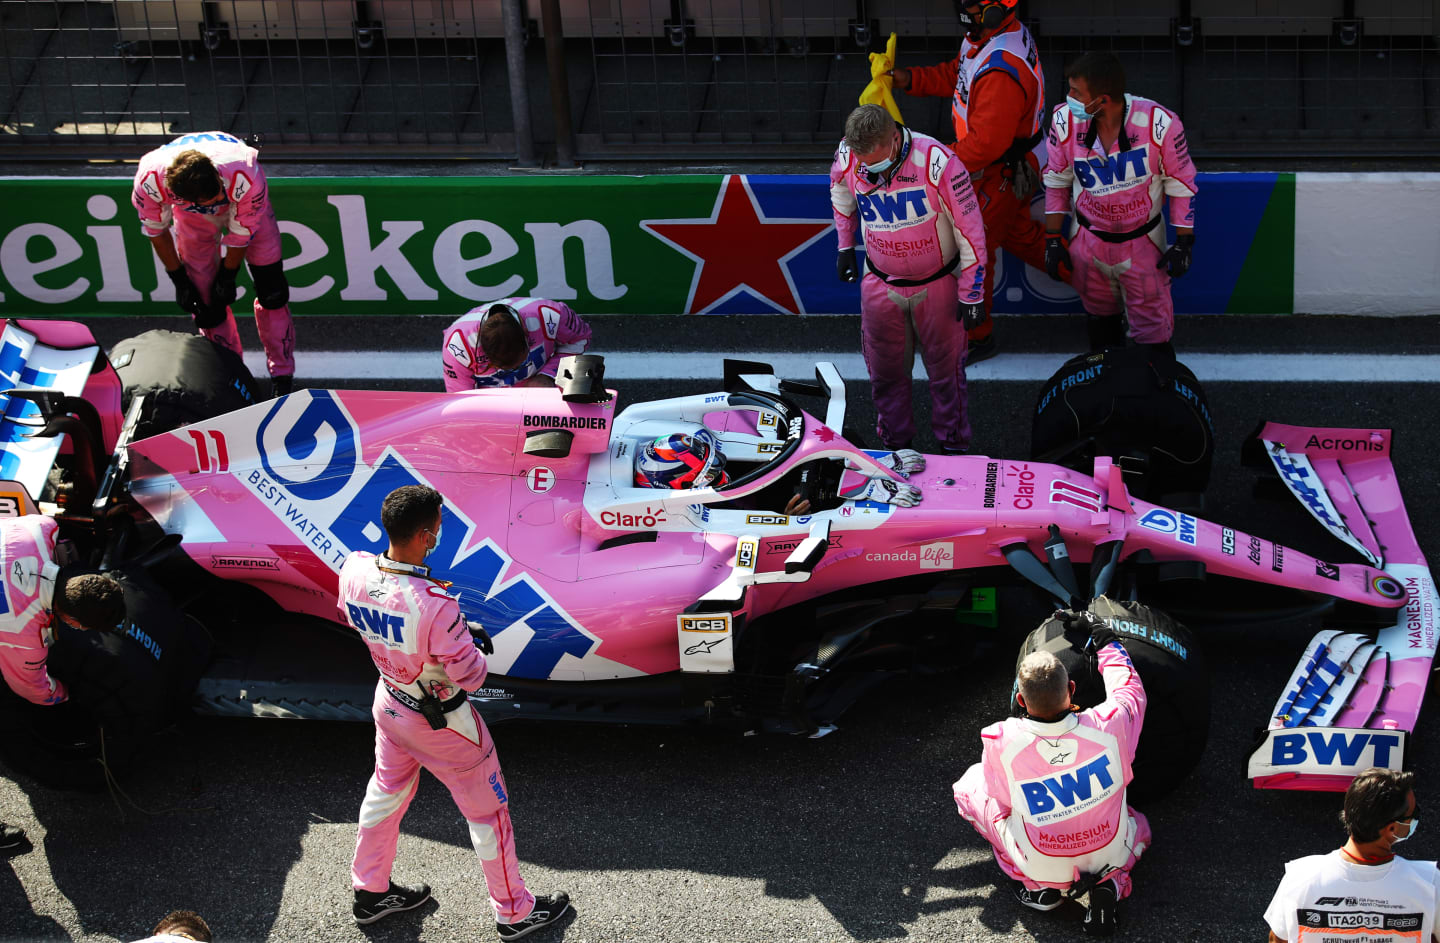 MONZA, ITALY - SEPTEMBER 06: Sergio Perez of Mexico and Racing Point stops in the Pitlane during a